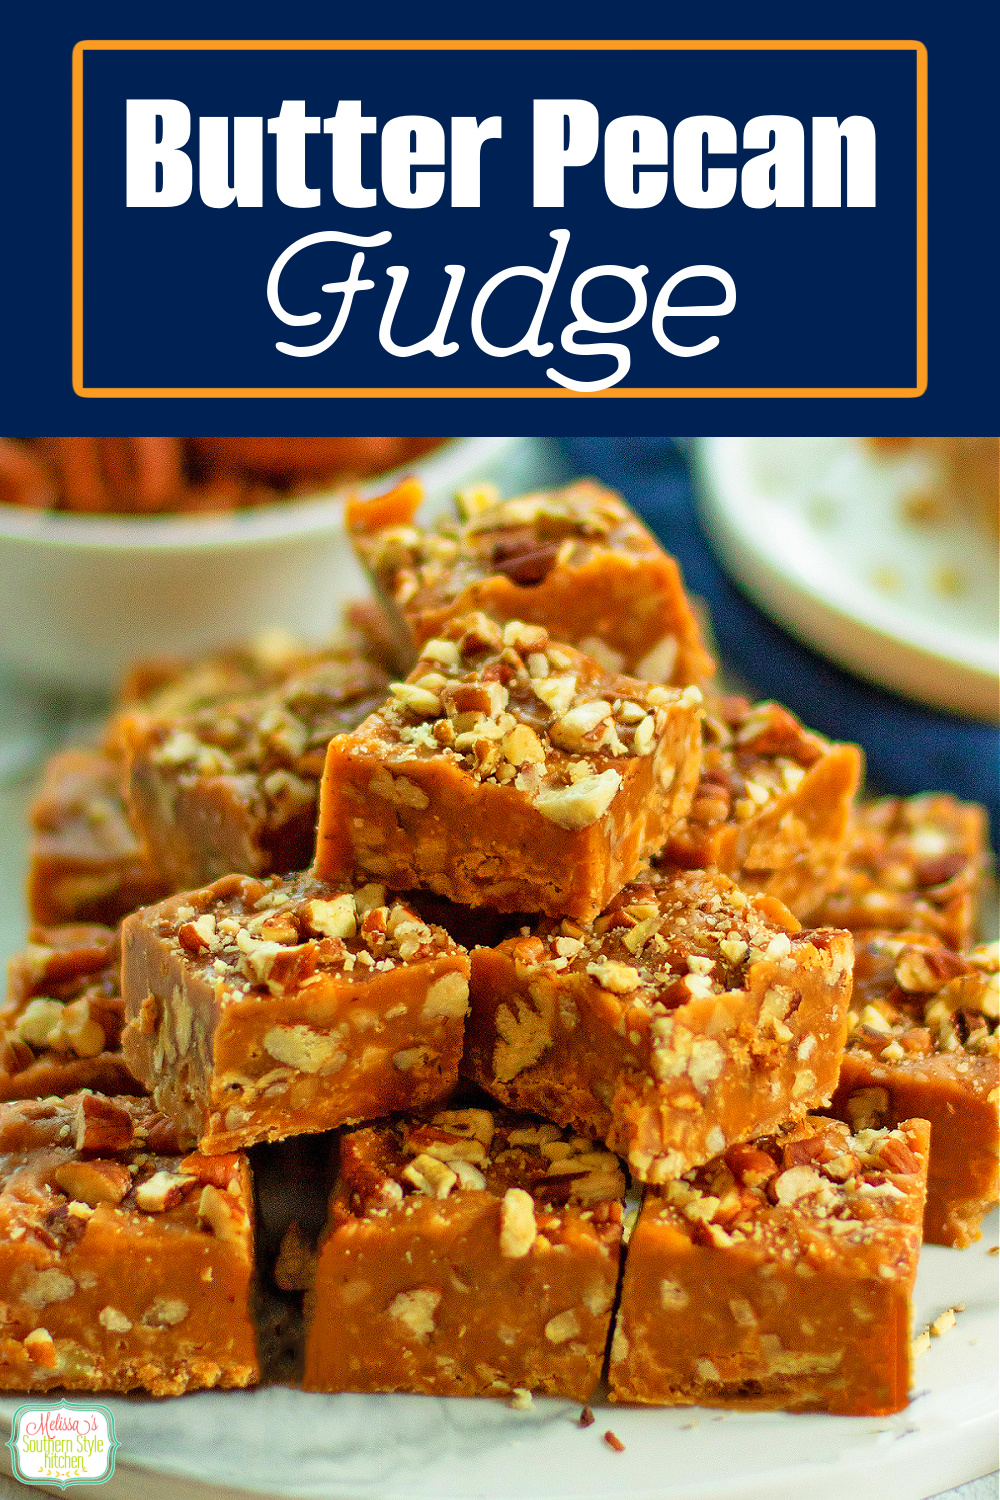 This rich Butter Pecan Fudge is an impressive confection to add to your holiday sweets and handmade candies menu. #butterpecanfudge #fudgerecipes #easyfudgerecipe #butterpecan #caramel #butterscotchfudge via @melissasssk